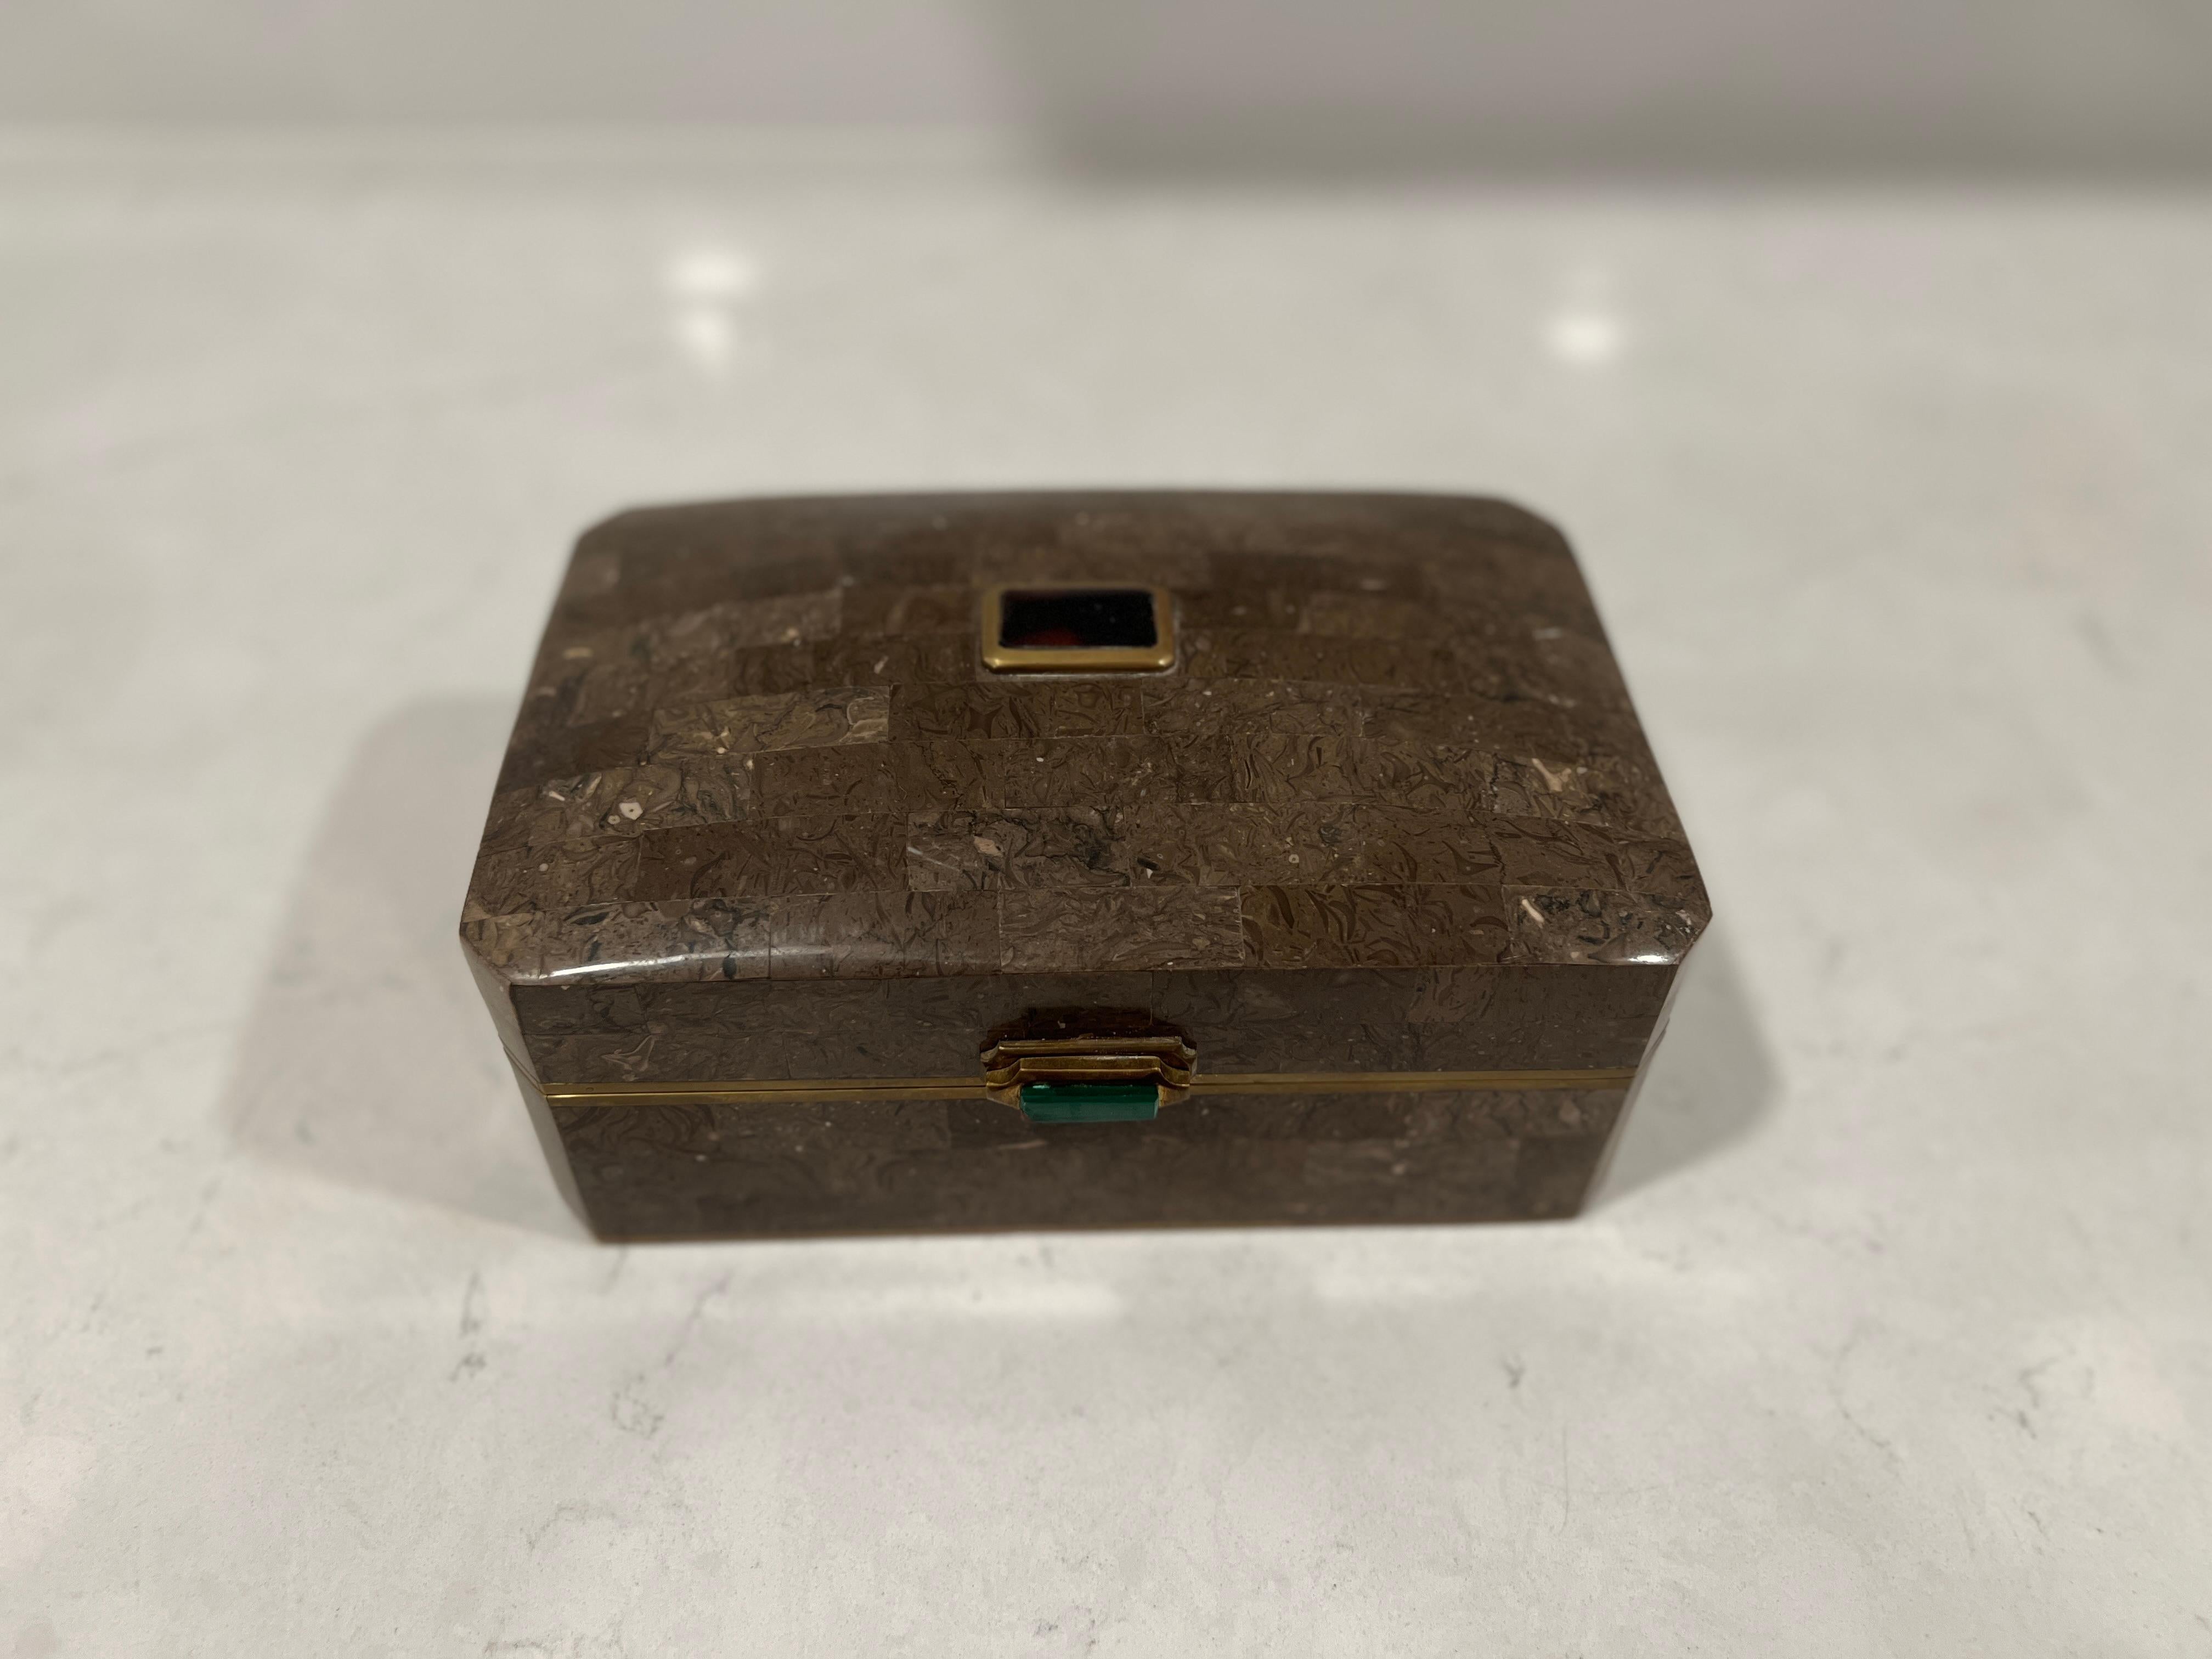 A vintage light brown tessellated stone box mounted with brass banding. The front hinge is adorned by a rectangular piece of carved malachite, and a finial with a deep amethyst colored stone. Original label affixed to underside. 

